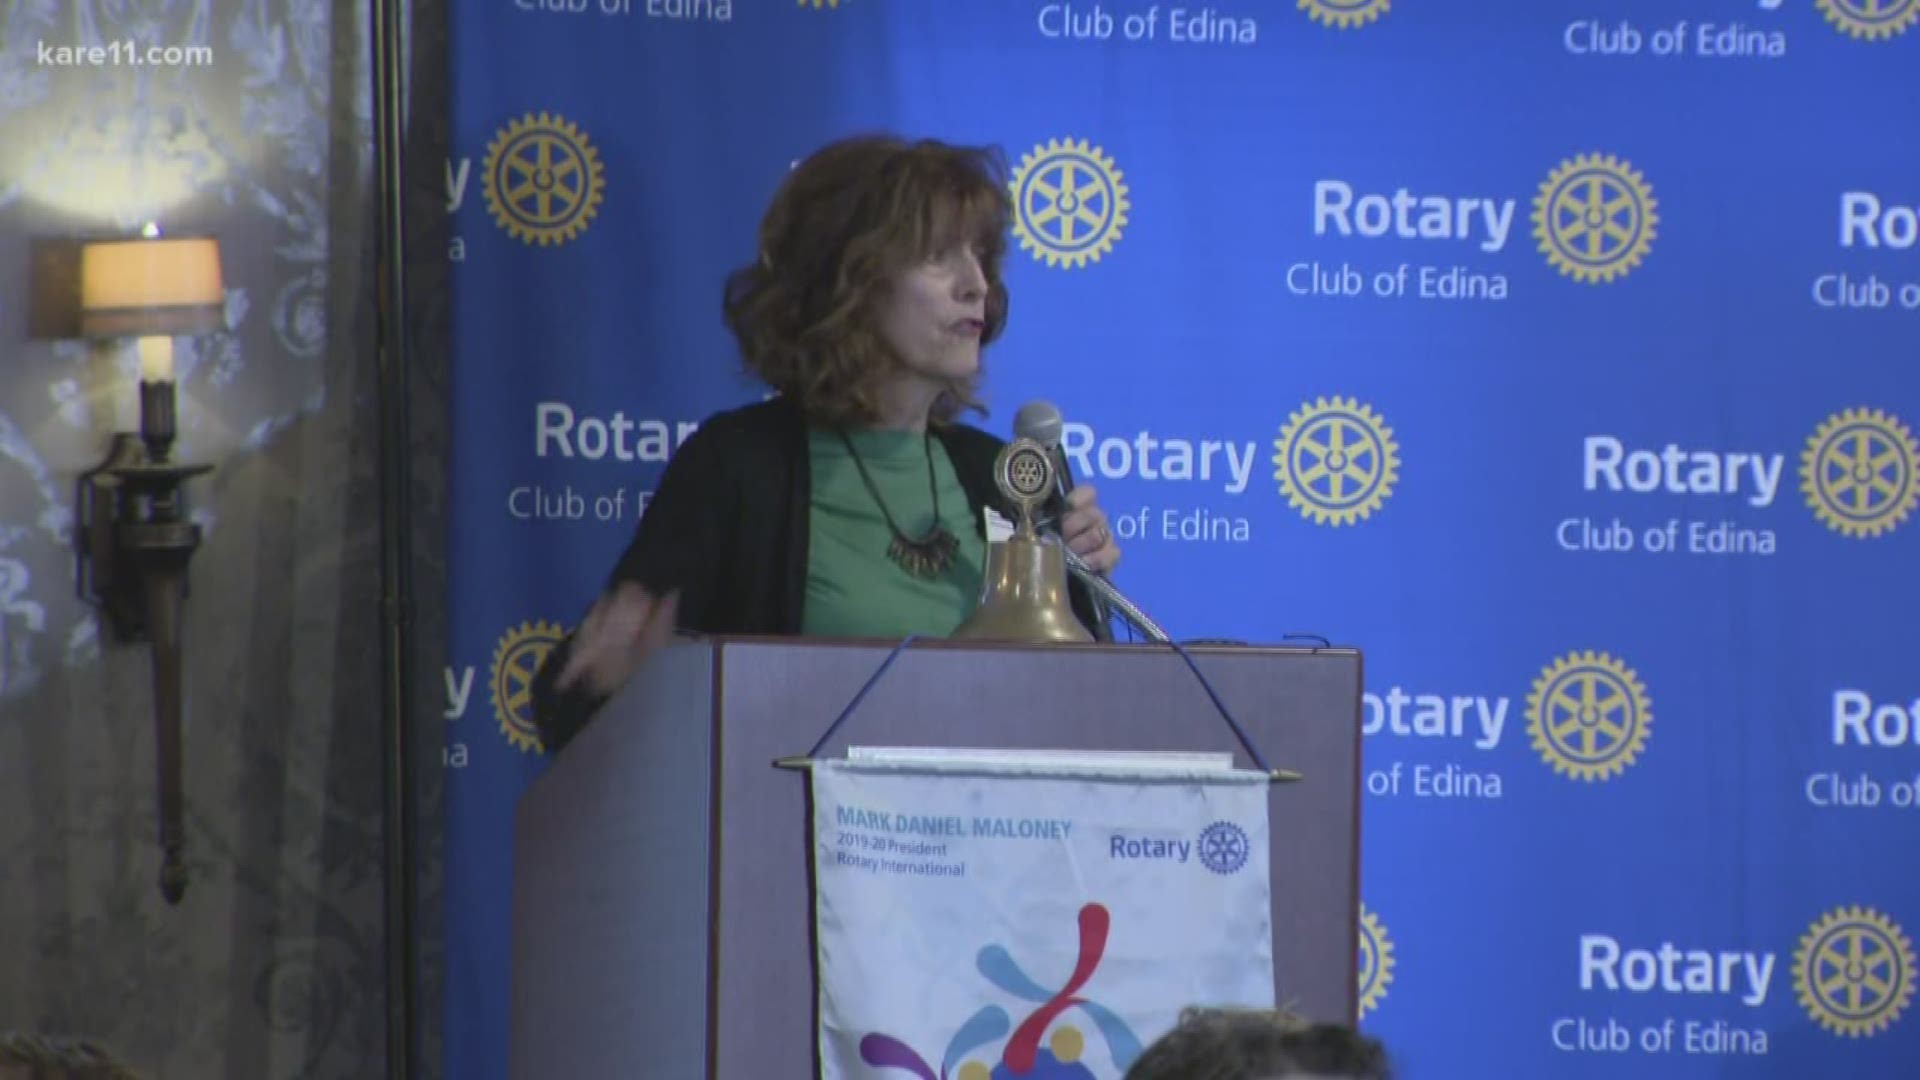 93% of human trafficking victims were sexually abused as kids. Edina Rotary members are looking to stop the cycle of human trafficking before it starts.